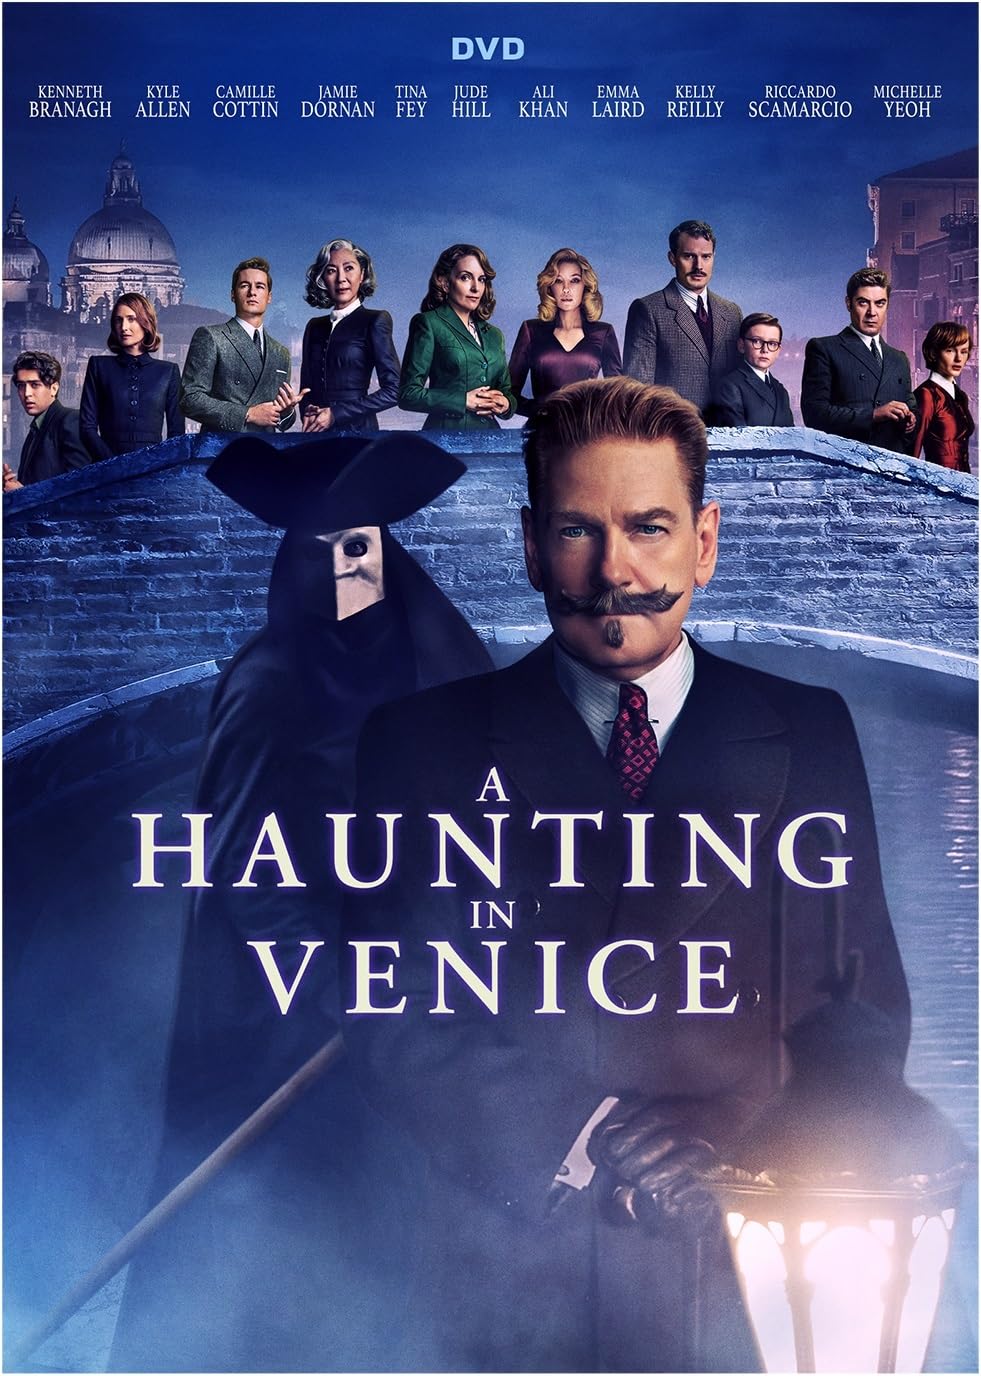 Image for "A haunting in Venice"